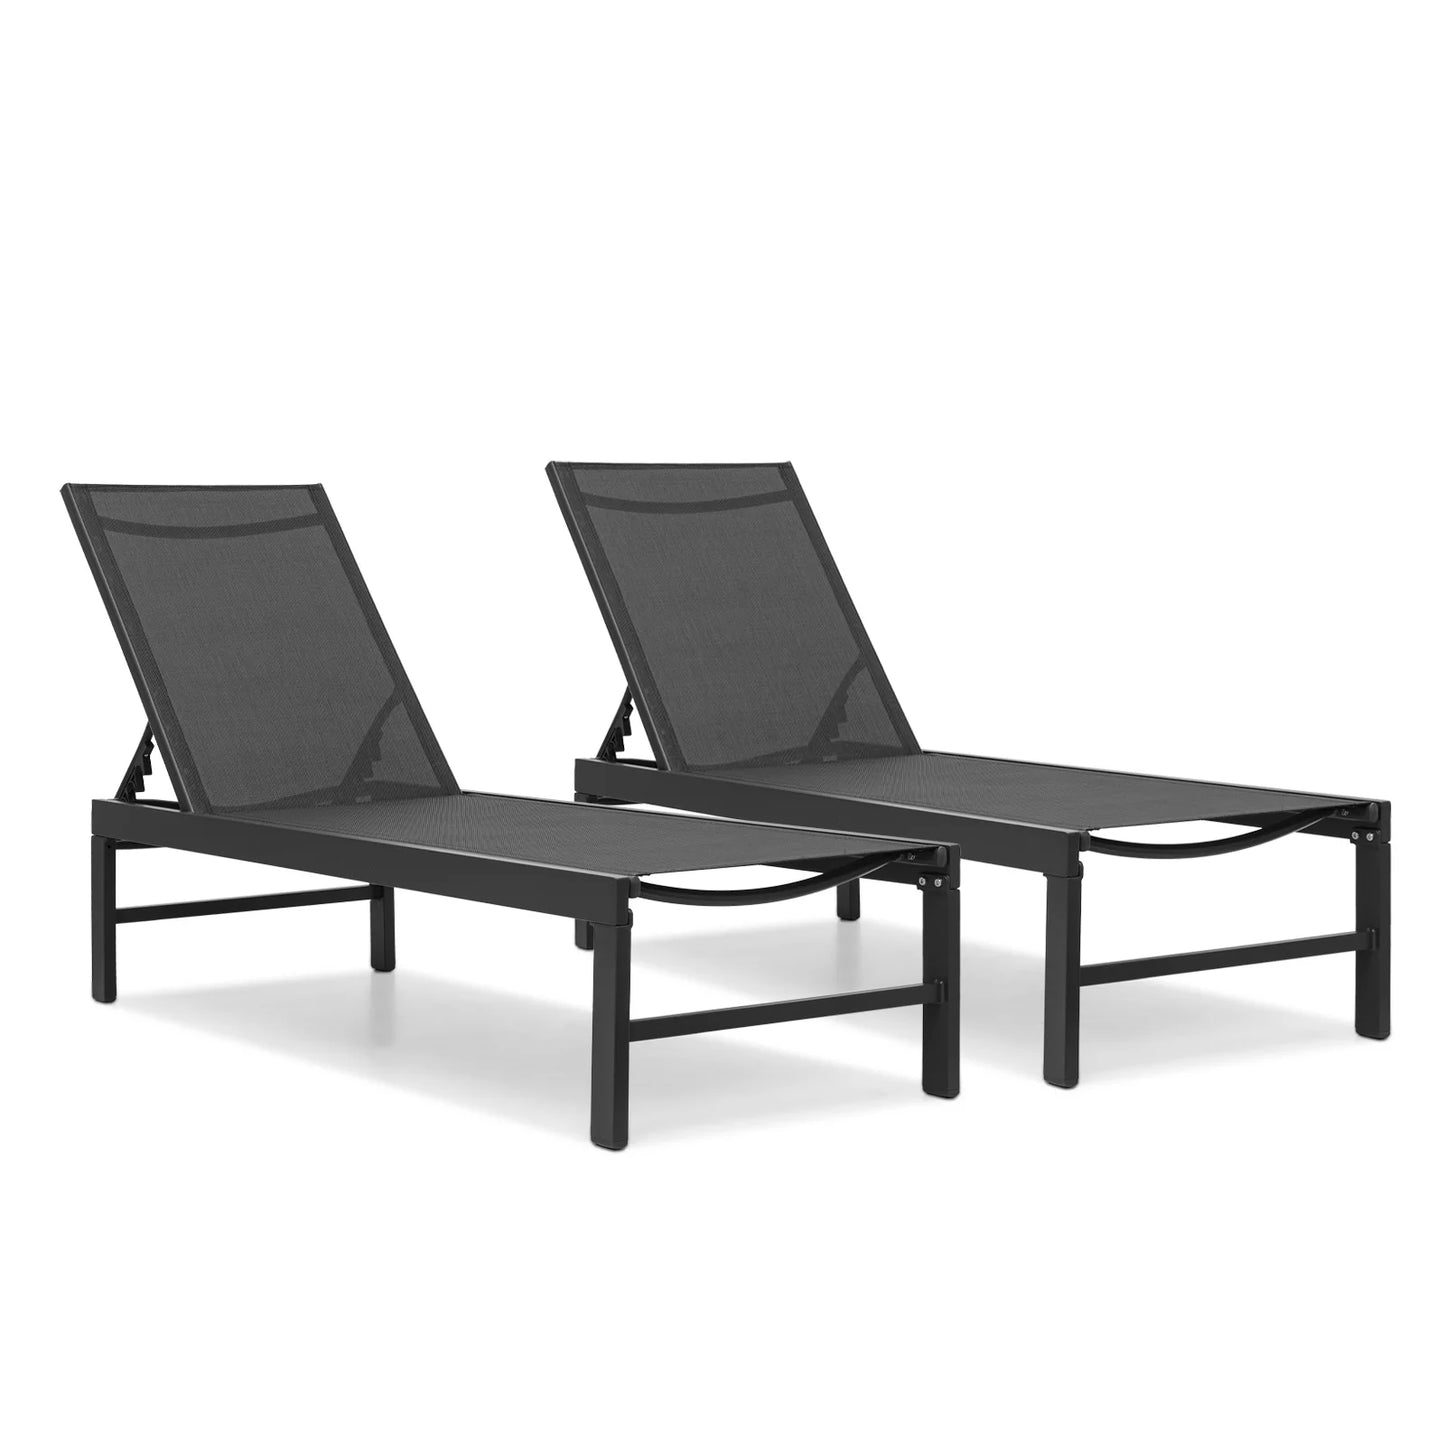 Magshion 2 Piece Outdoor Patio Lounge Chairs with Adjustable Backrest, Pool Recliner Lounge Chaise with Aluminum Frame for Beach Backyard Garden, Black